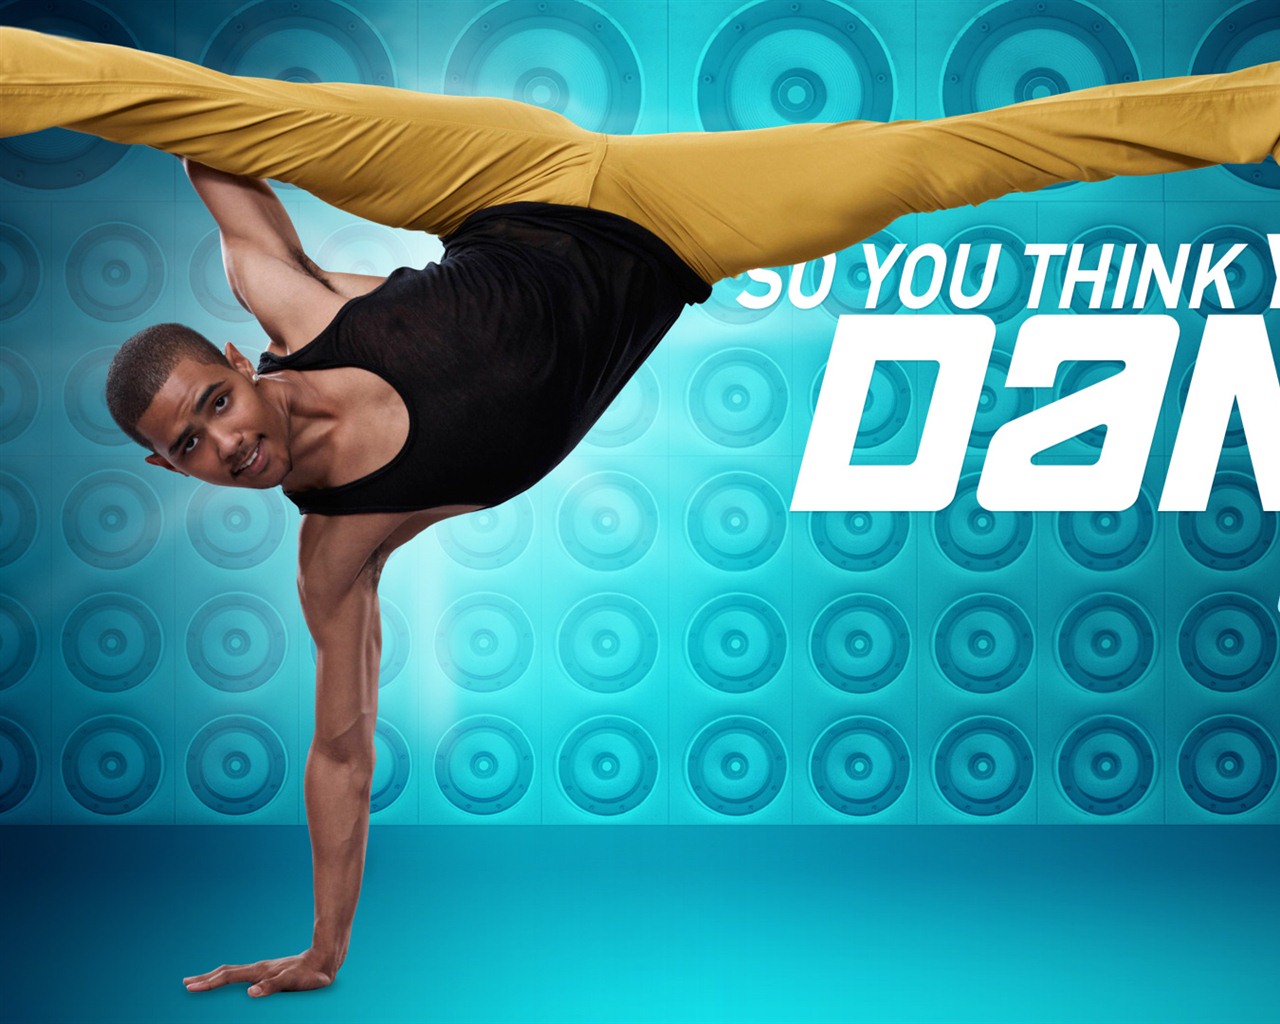 So You Think You Can Dance 2012 HD wallpapers #13 - 1280x1024